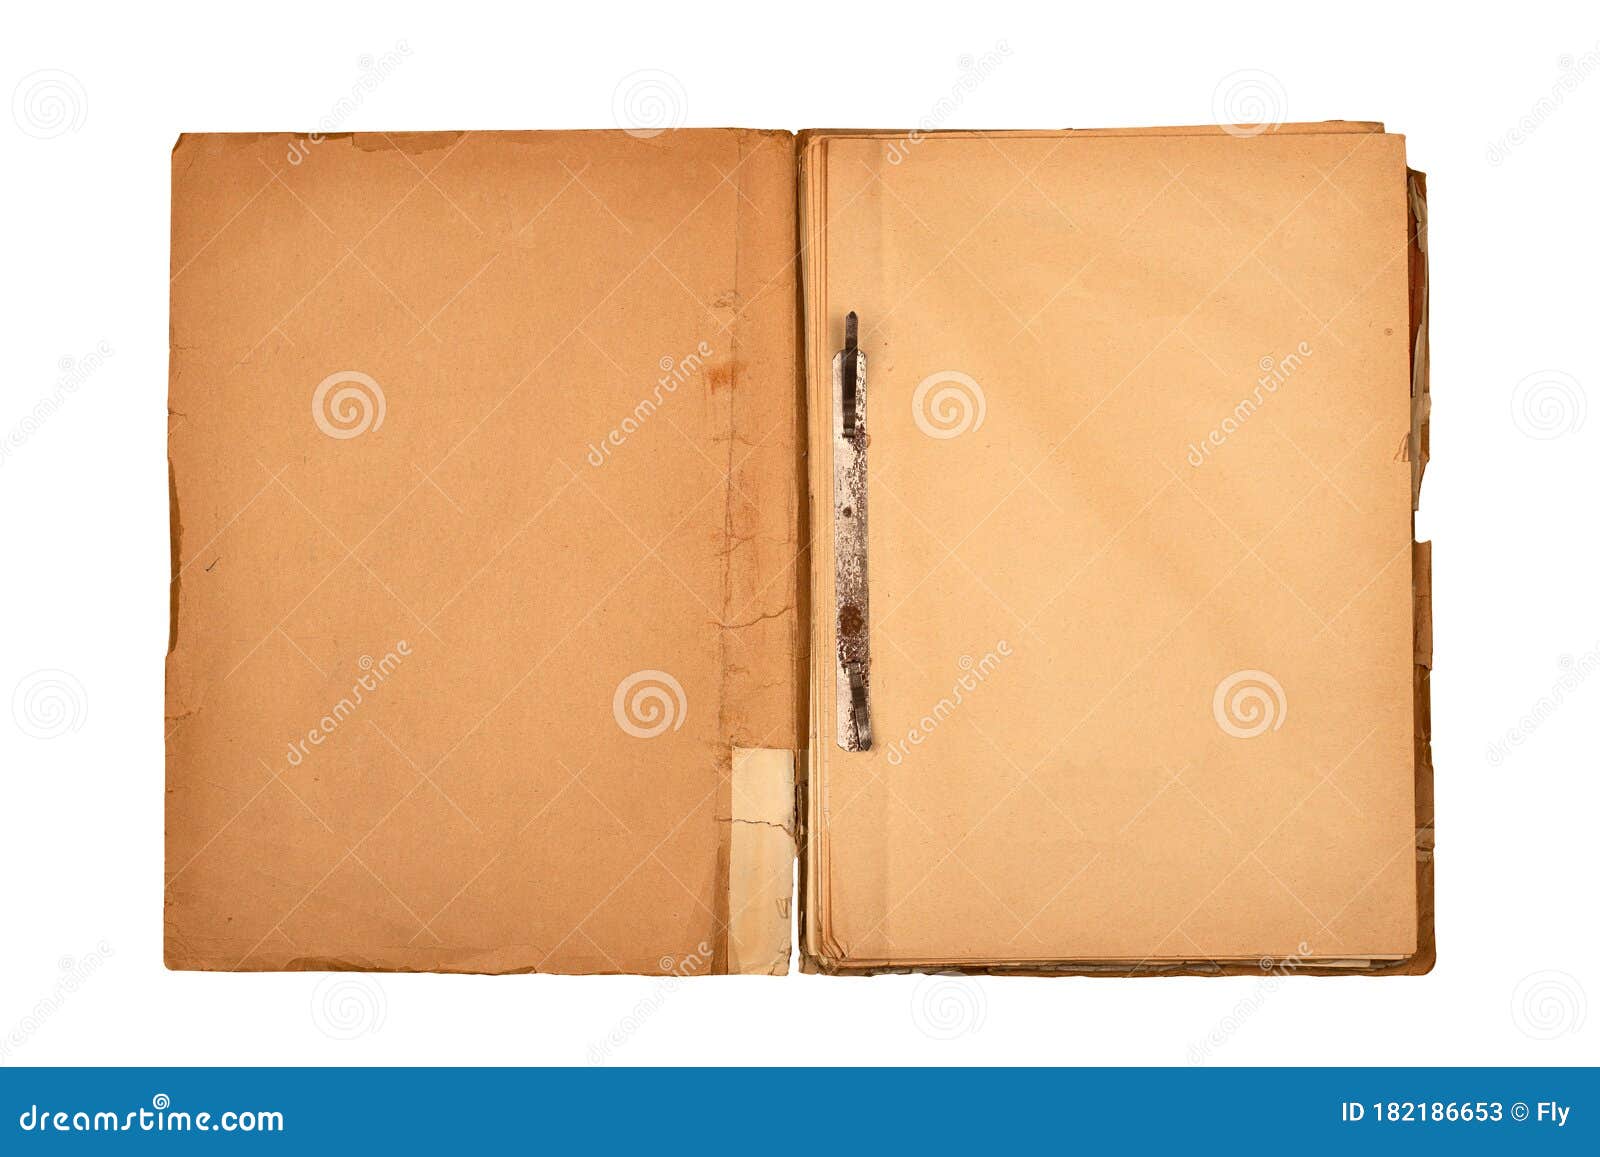 Open File Folder With Aged Light Brown Empty Pages Stock Image - Image ...